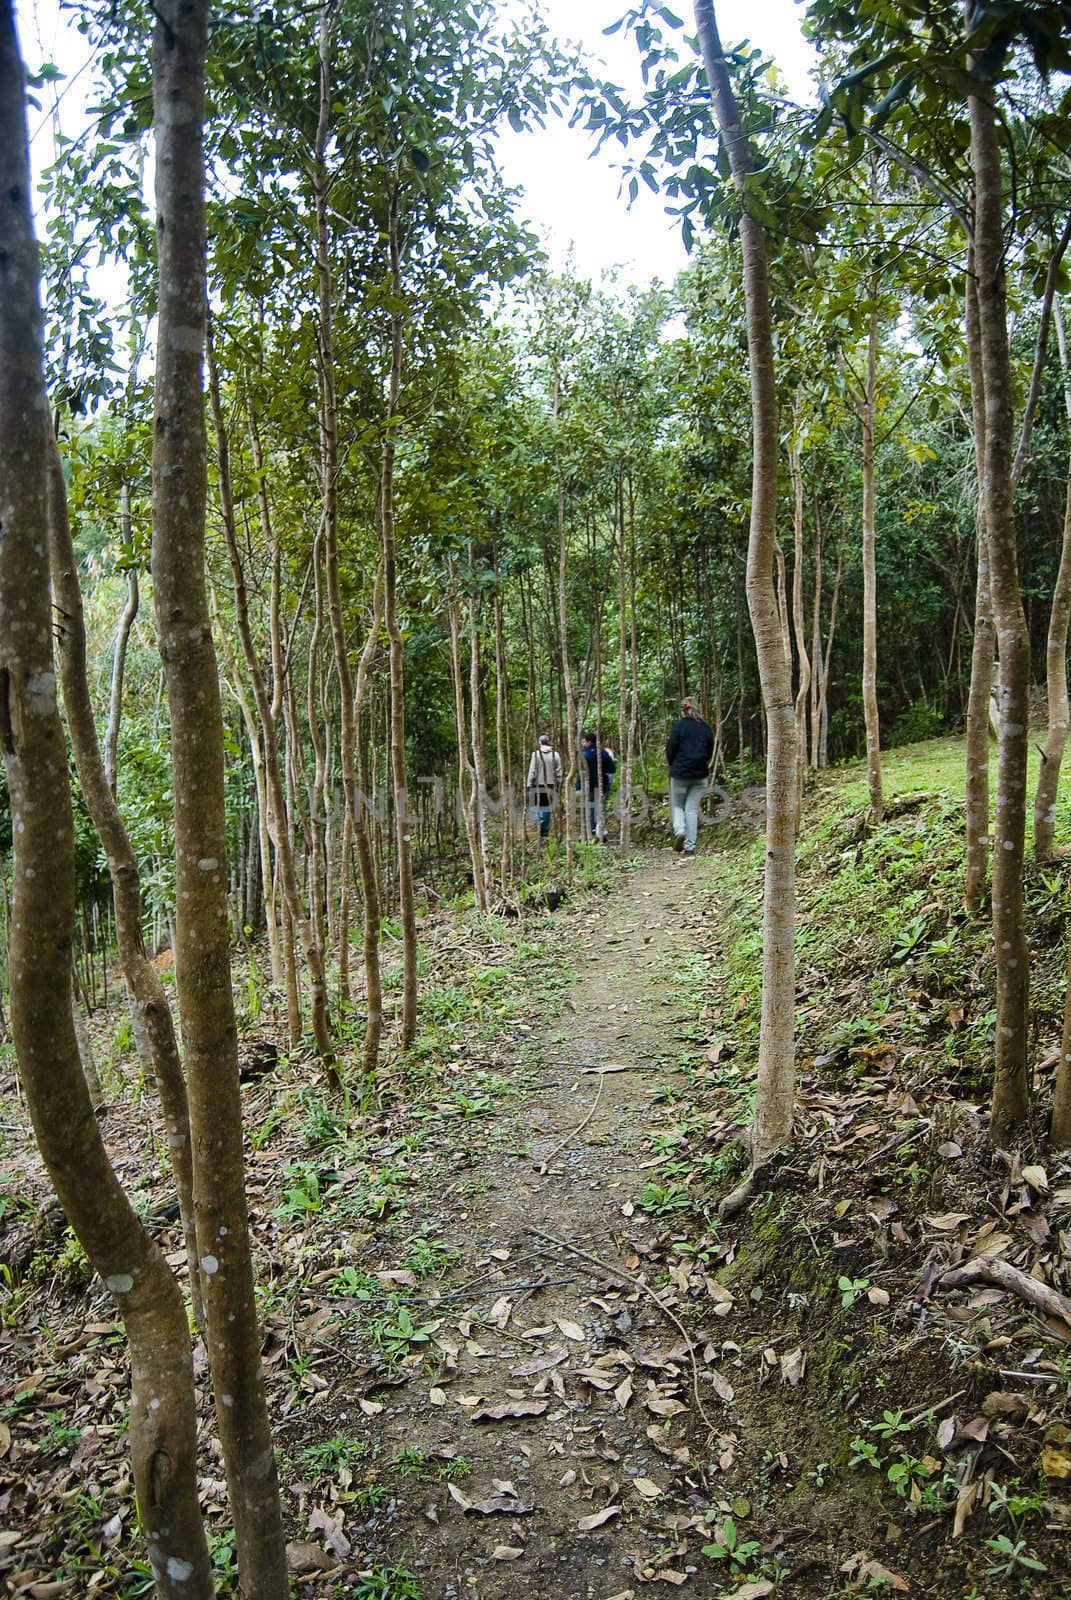 People walking on the forest.